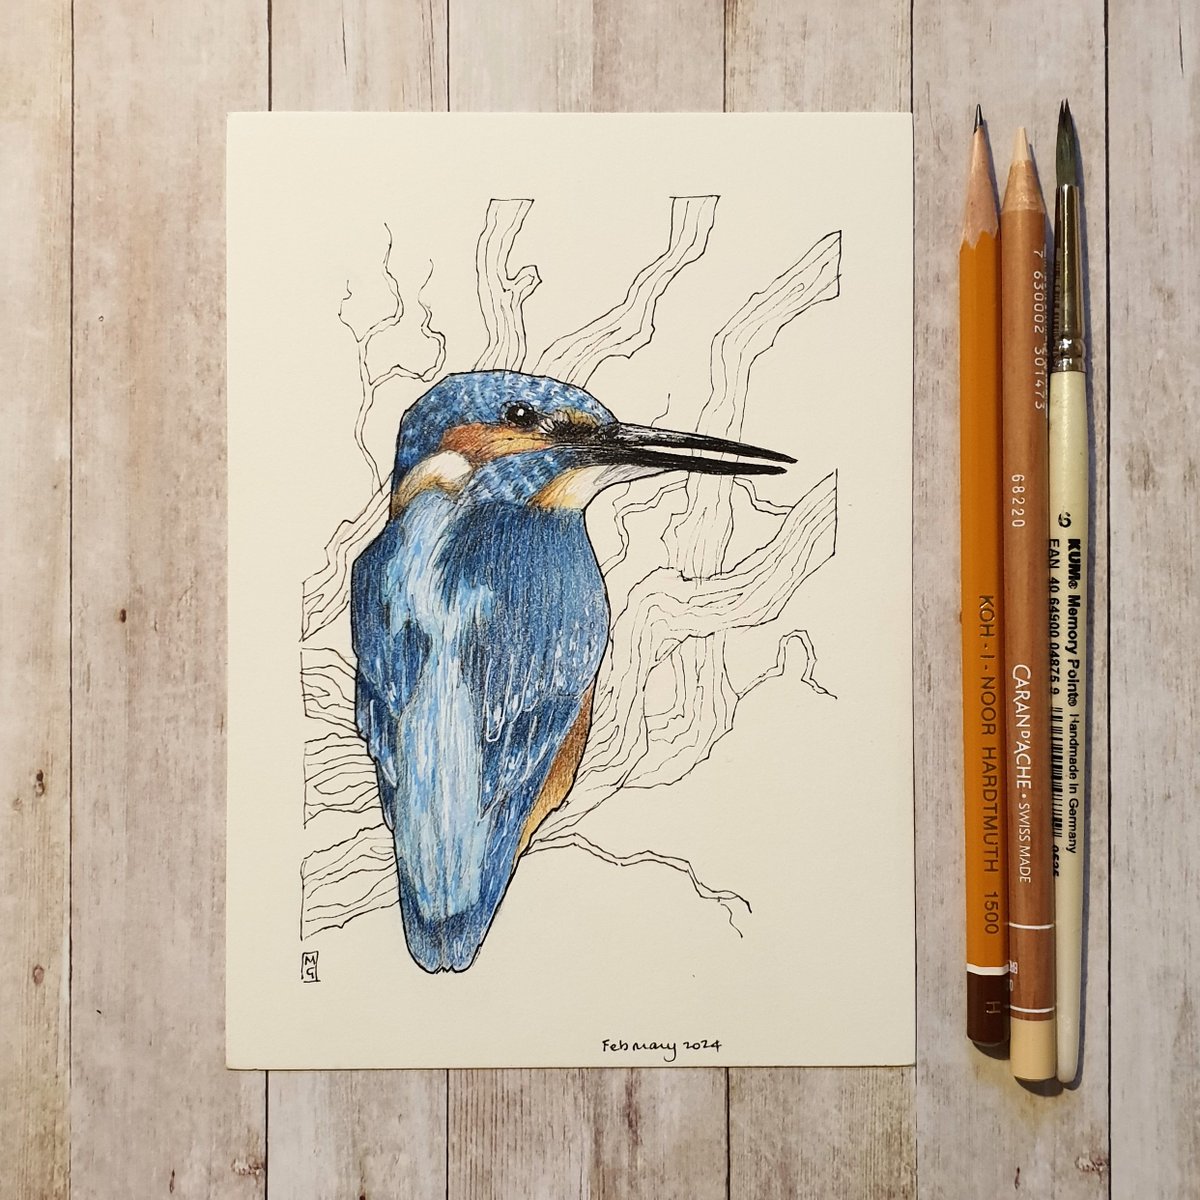 The kingfisher is widespread in the UK but is absent from northern Scotland. It is active all year round near rivers, canals and wetlands.
My drawing is available...
theweeowlart.etsy.com/listing/168250…
#kingfisher #BirdArt  #OriginalArt #drawing #PenAndInk #ColourPencil  #TraditionalArt